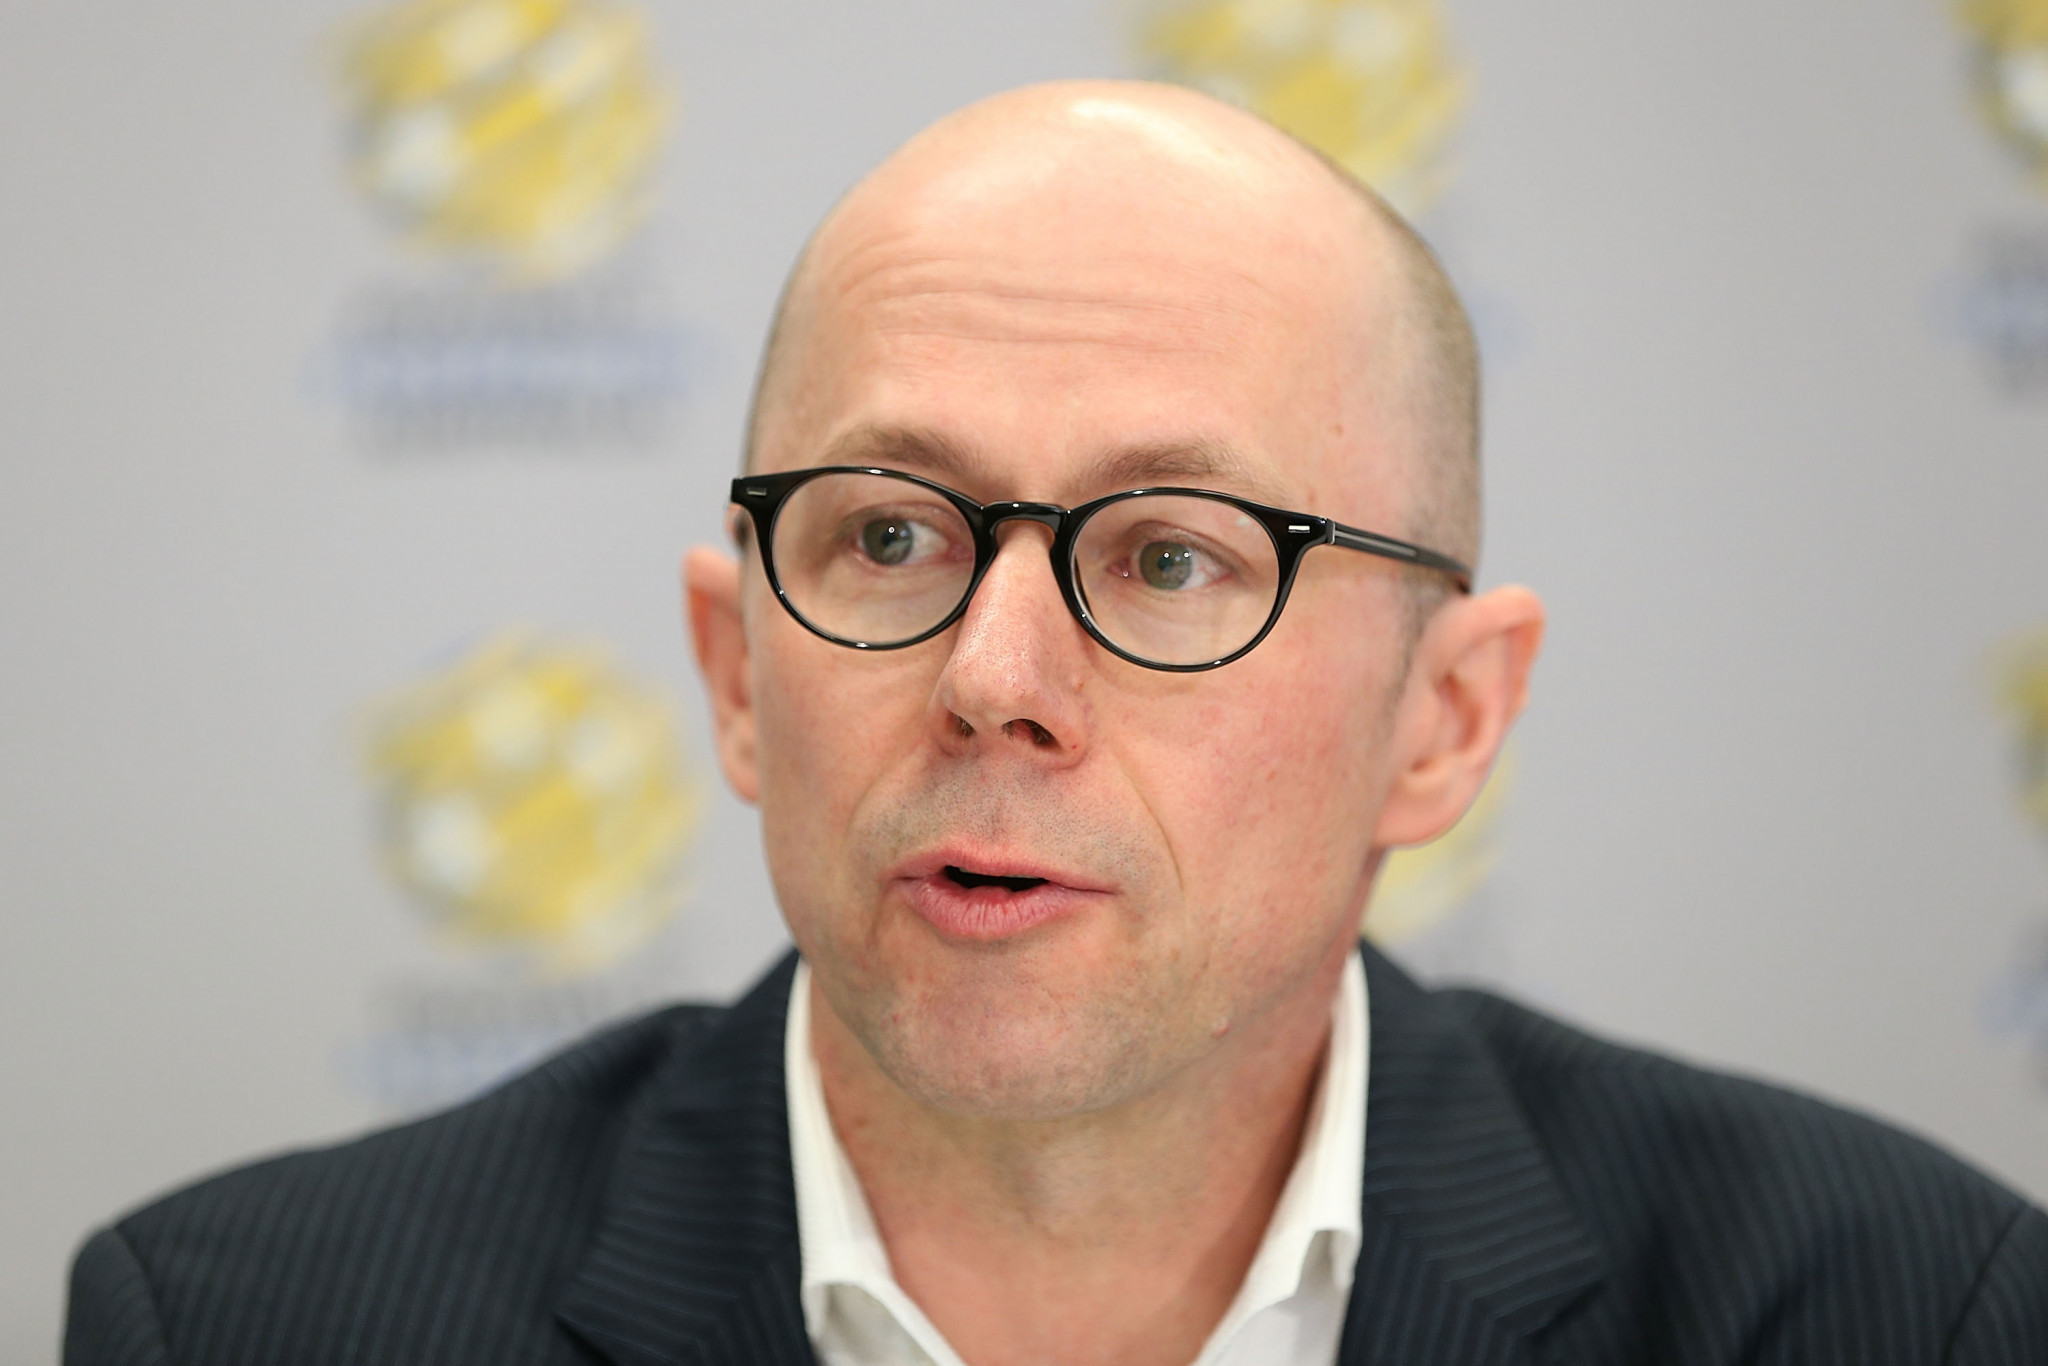 World Players Association executive director Brendan Schwab was among those to ask Beijing 2022 to include human rights issues in its sustainability plan ©Getty Images